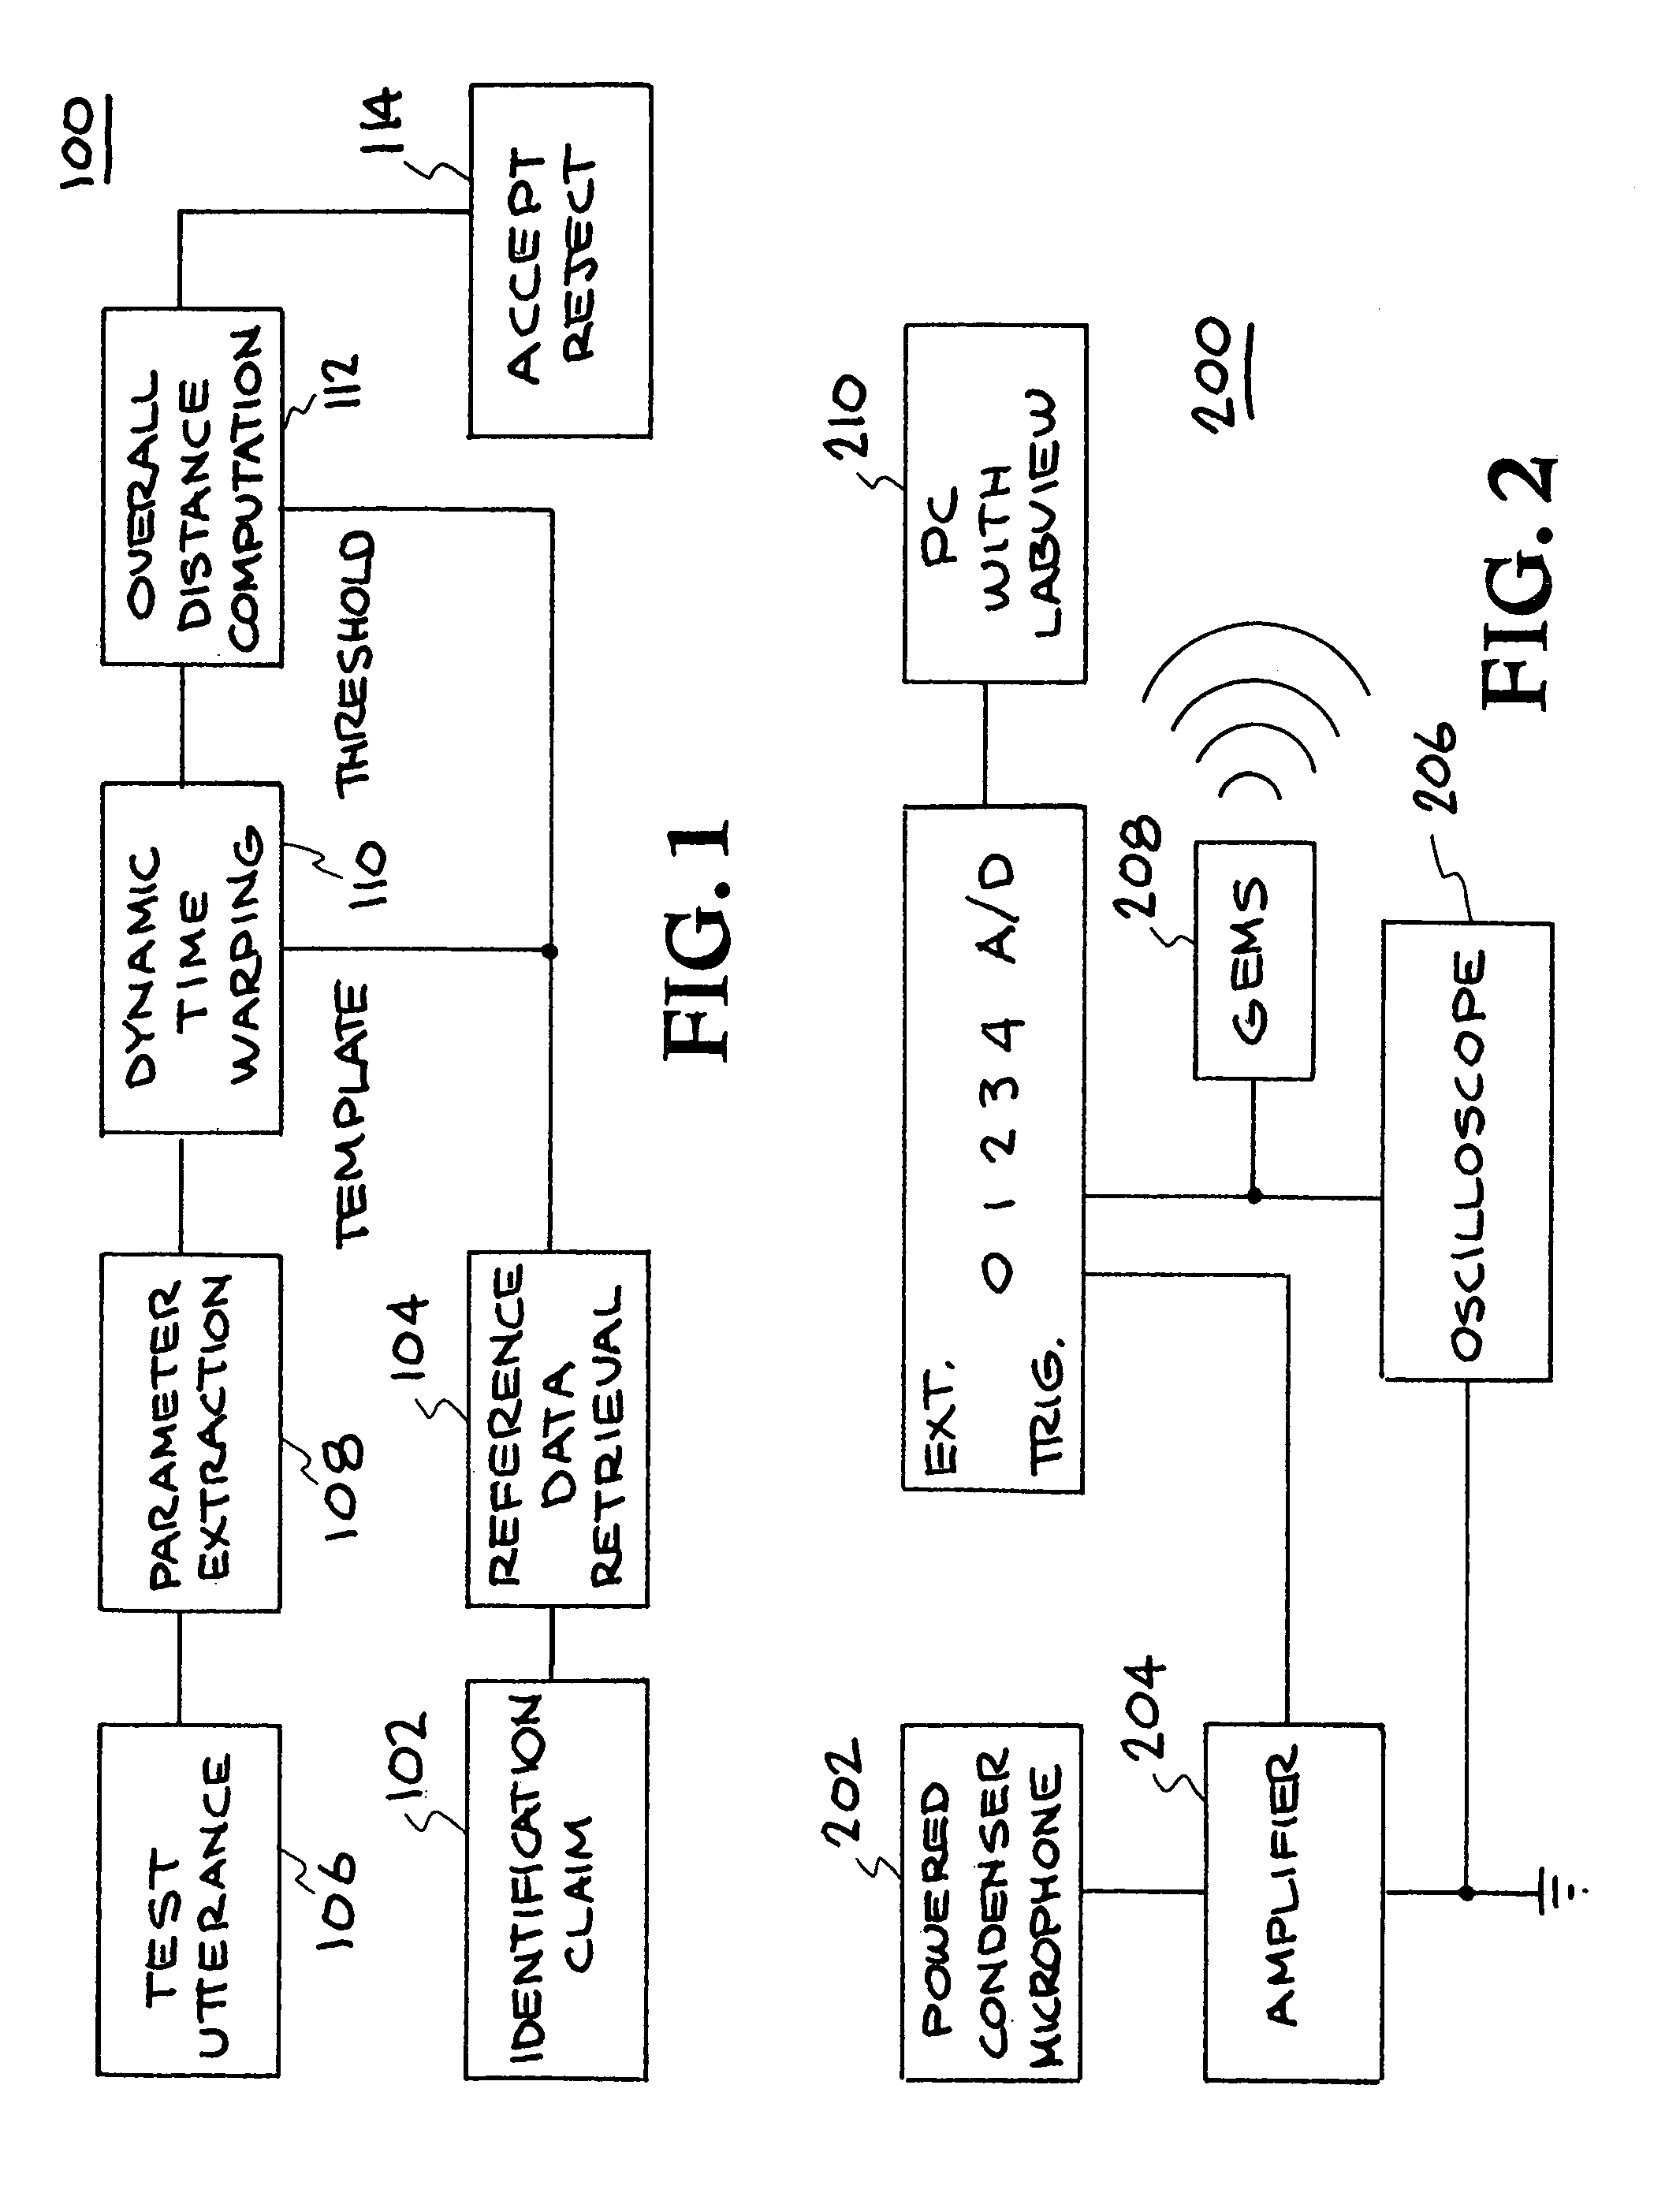 Speaker verification system using acoustic data and non-acoustic data